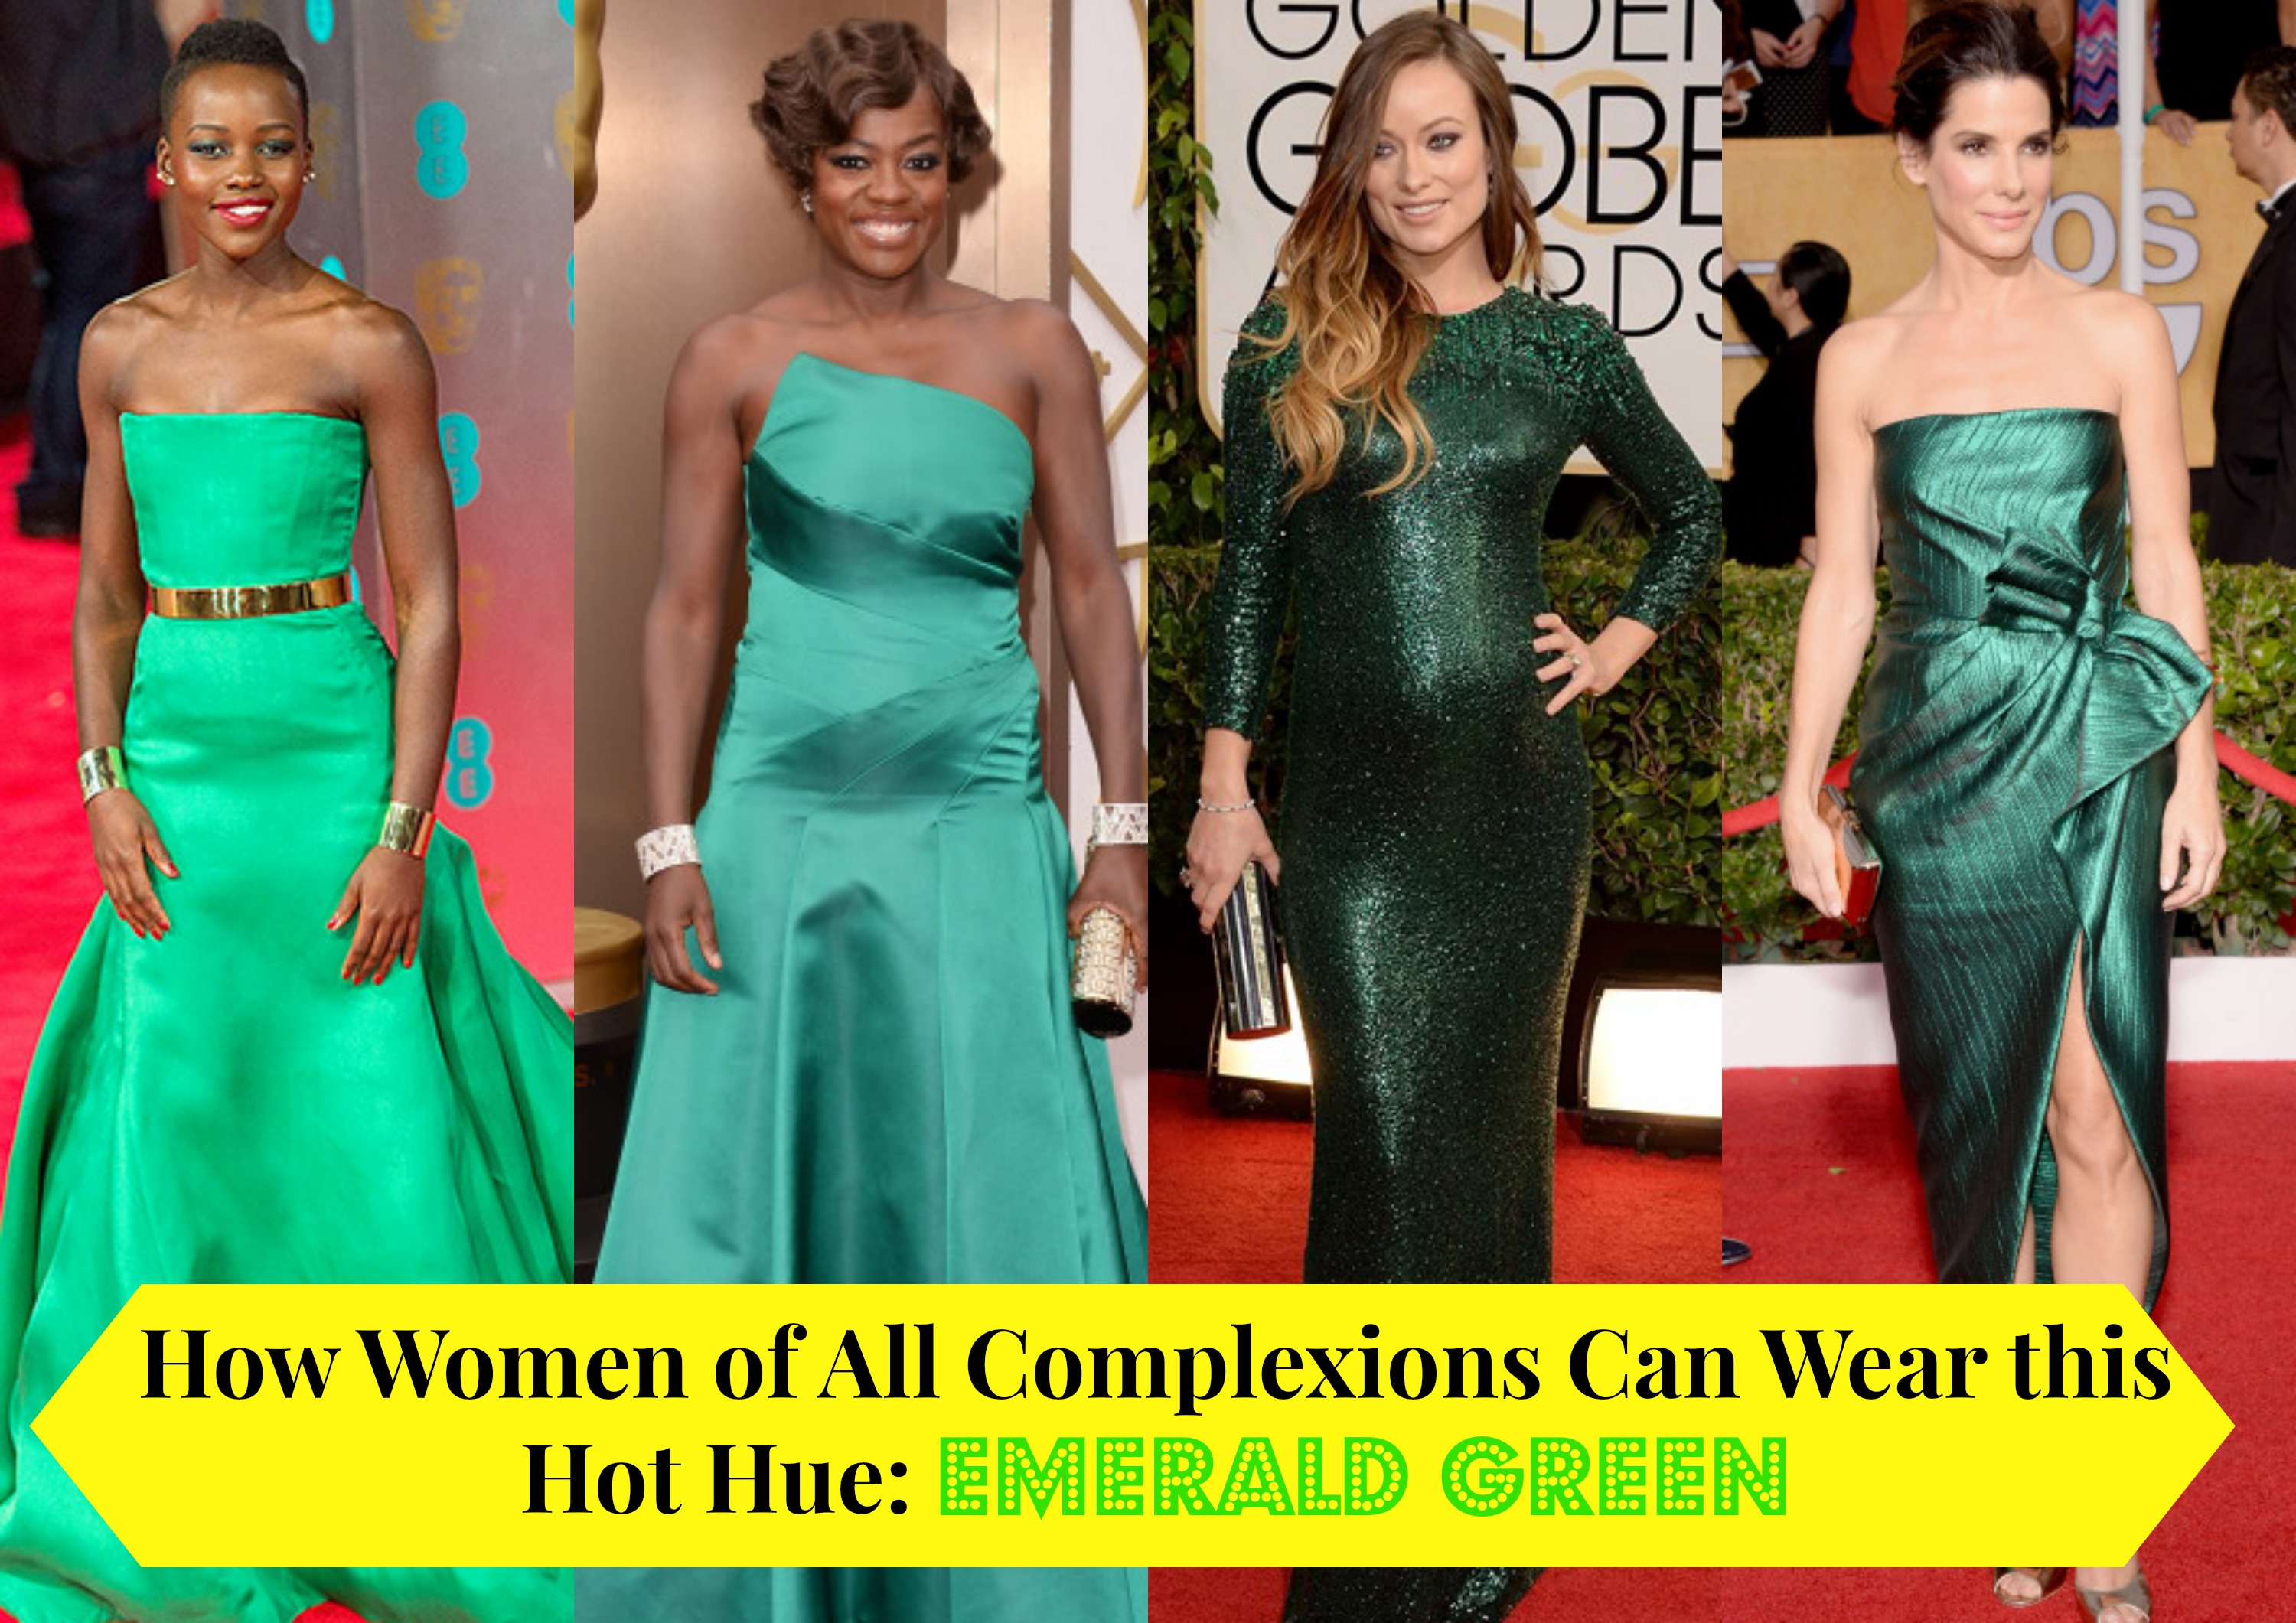 Tell me how you wear emerald green and enter to win a $200 gift card